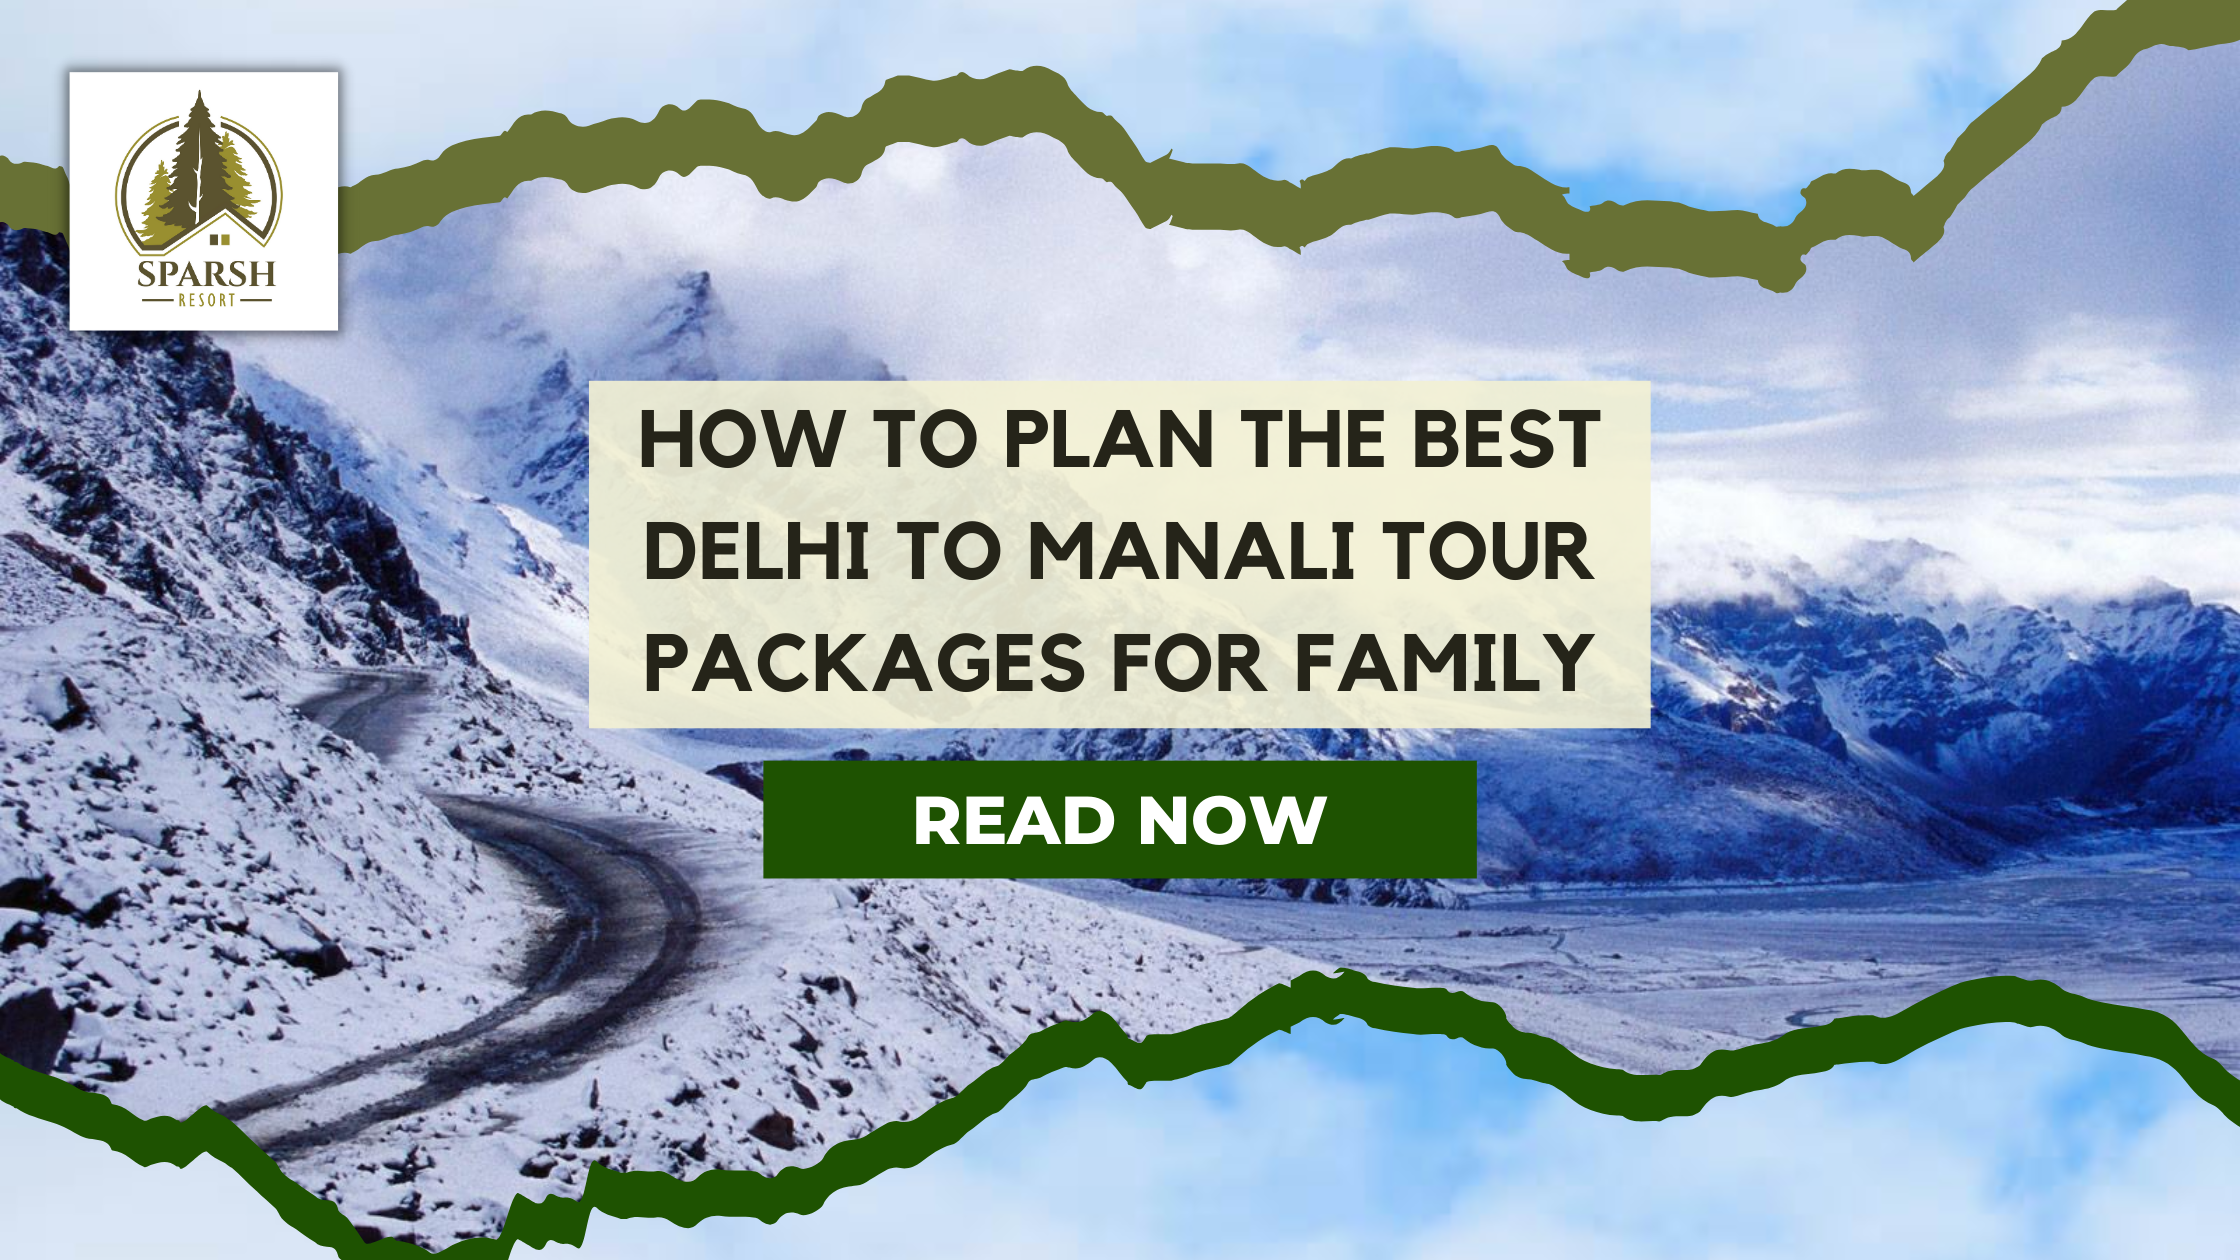 How to Plan the Best Delhi to Manali Tour Packages for Family - Sparsh Resort